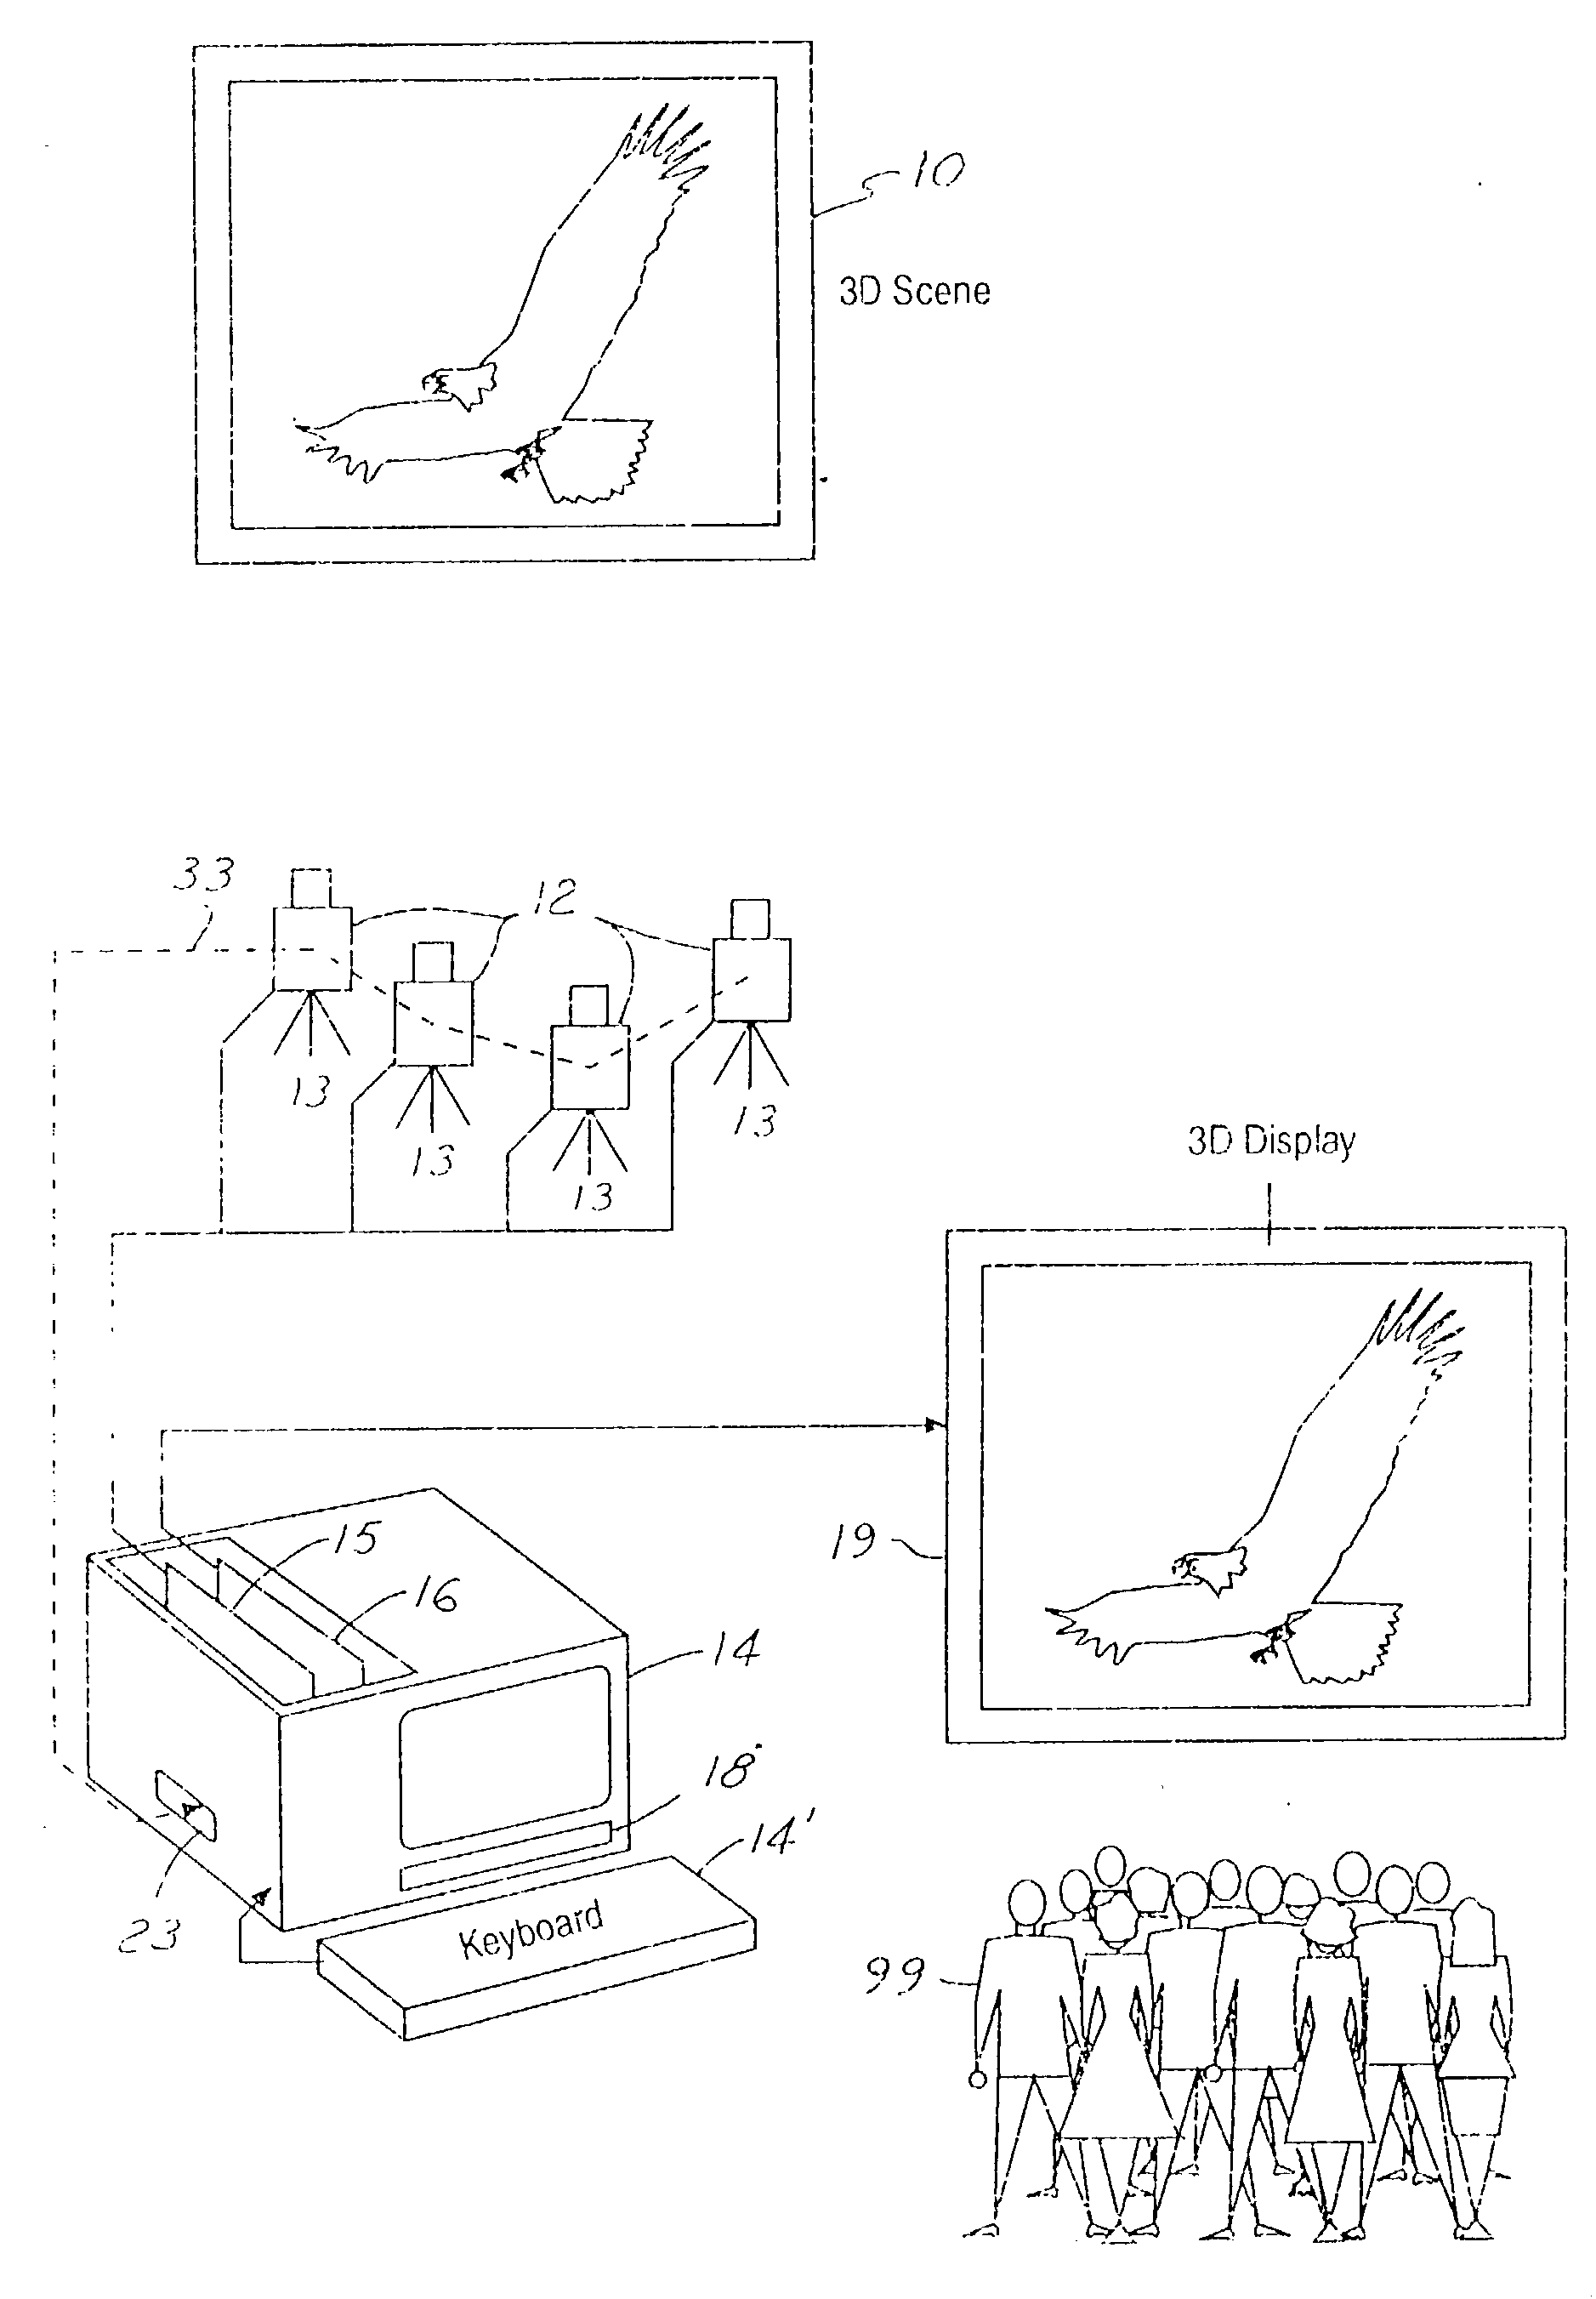 Three-dimensional display system: apparatus and method